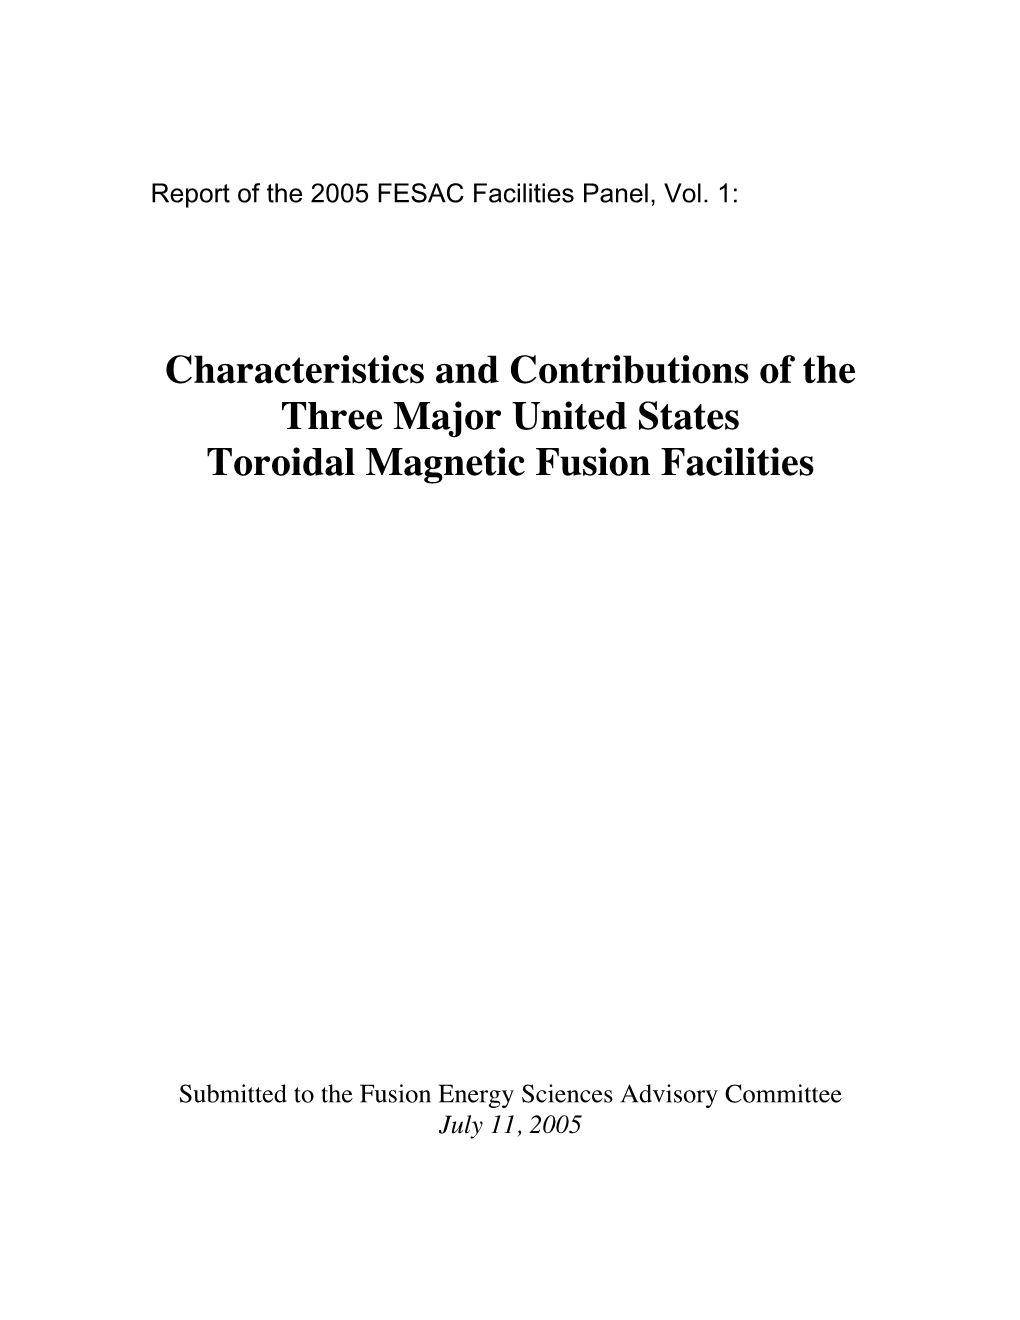 Characteristics and Contributions of the Three Major United States Toroidal Magnetic Fusion Facilities